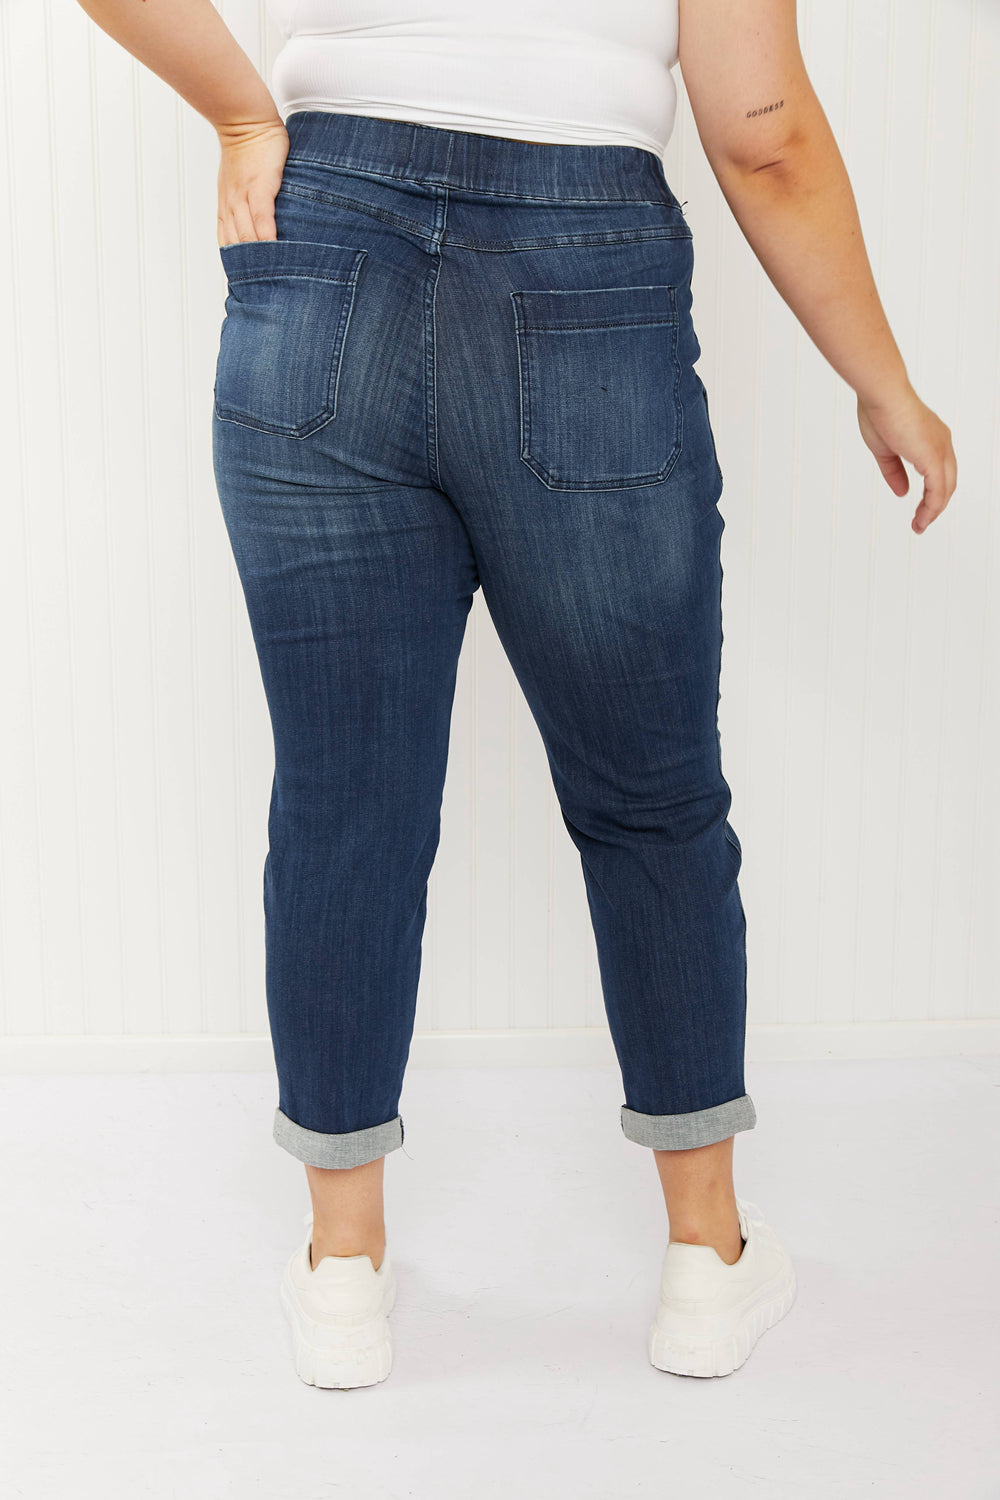 Judy Blue Full Size Drawstring Elastic Waist Jeans with Pockets Jeans JT's Designer Fashion